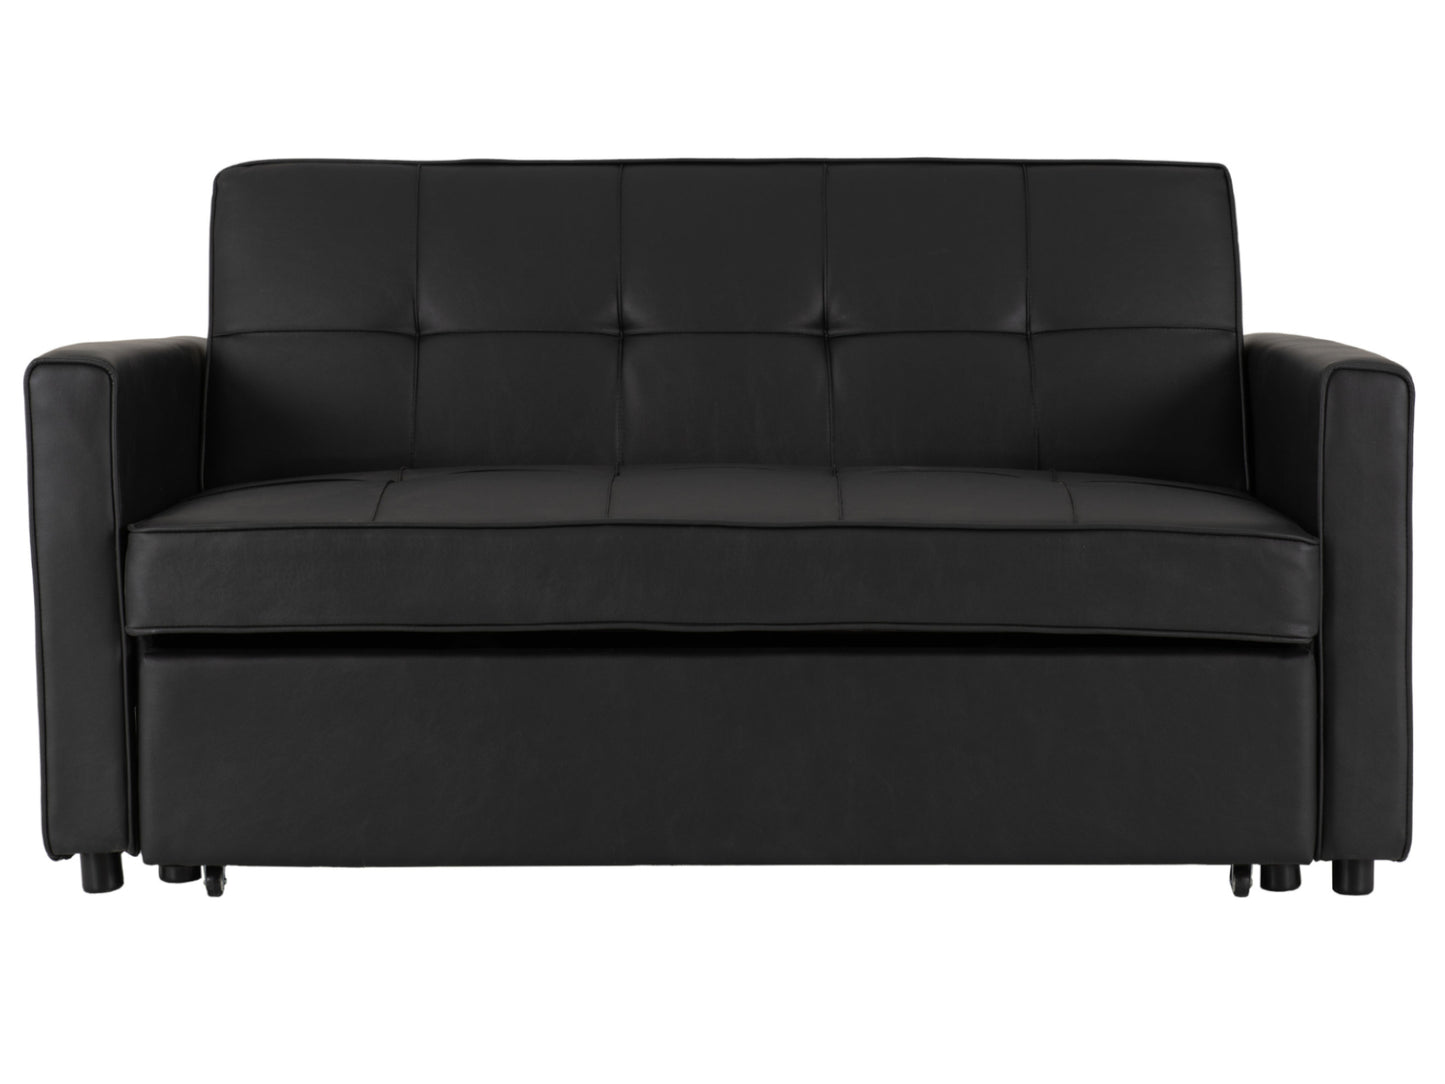 Astoria Sofa Bed in Black Faux Leather